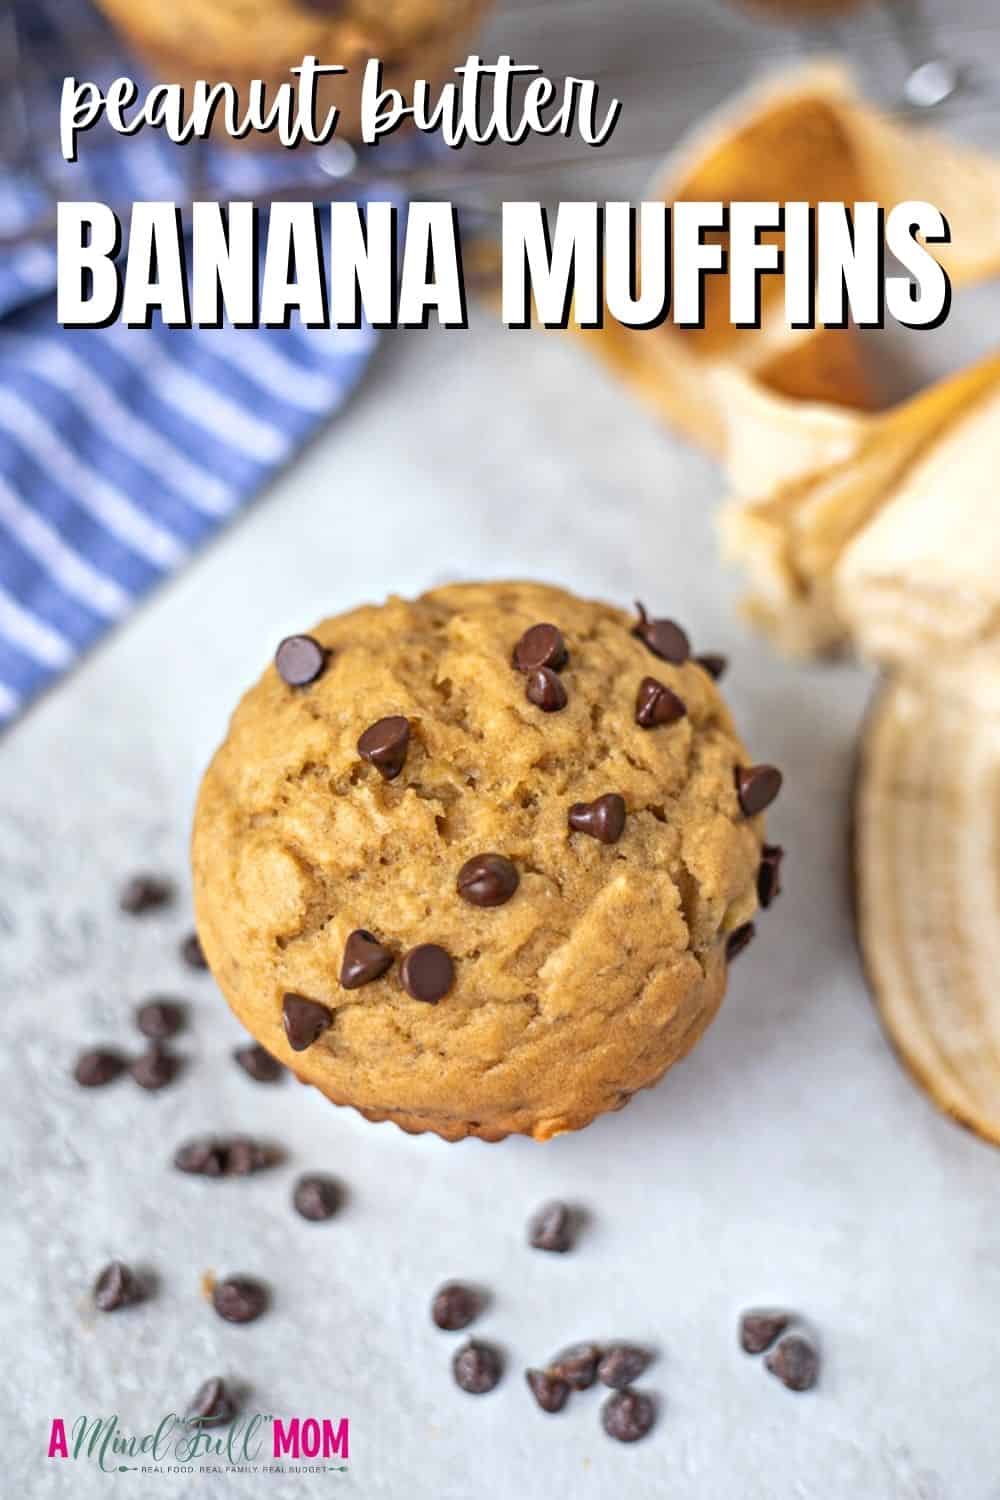 These Peanut Butter Banana Muffins are light, fluffy, and studded with chocolate chips. They are lower in fat and sugar, making these muffins perfect for a wholesome breakfast or a healthy treat.  